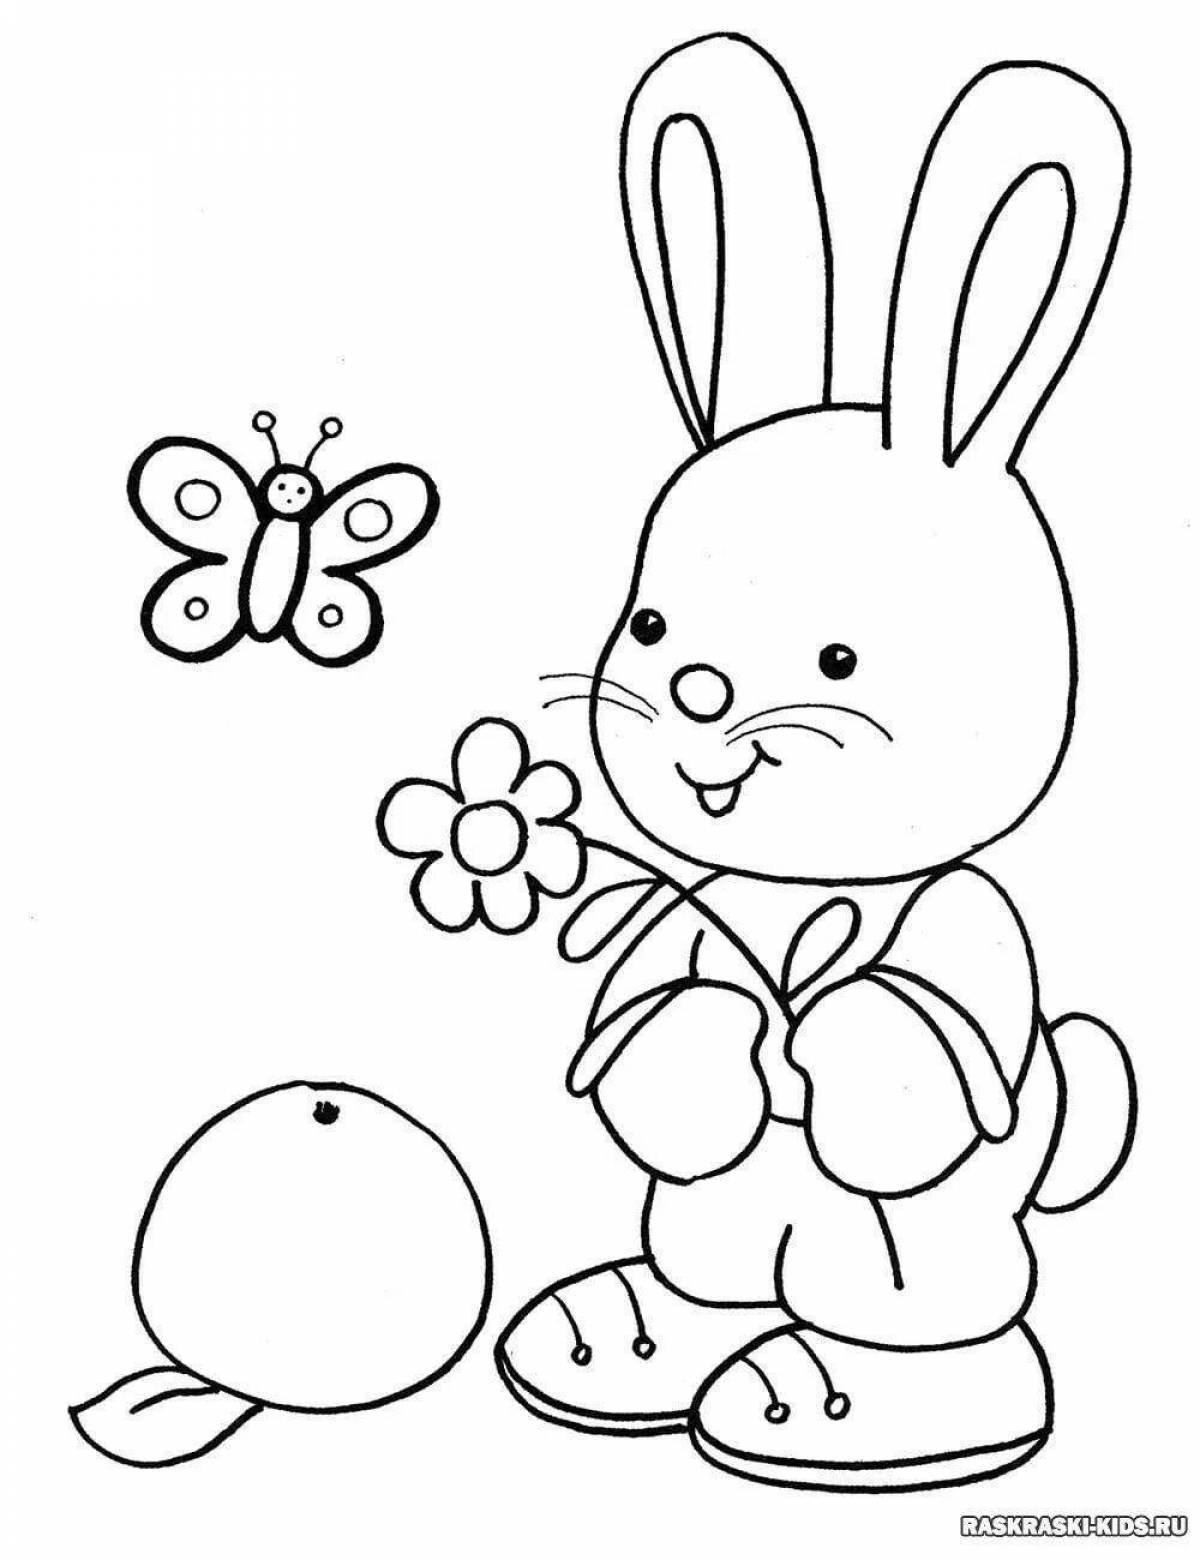 Cute coloring book for 4 year old girls